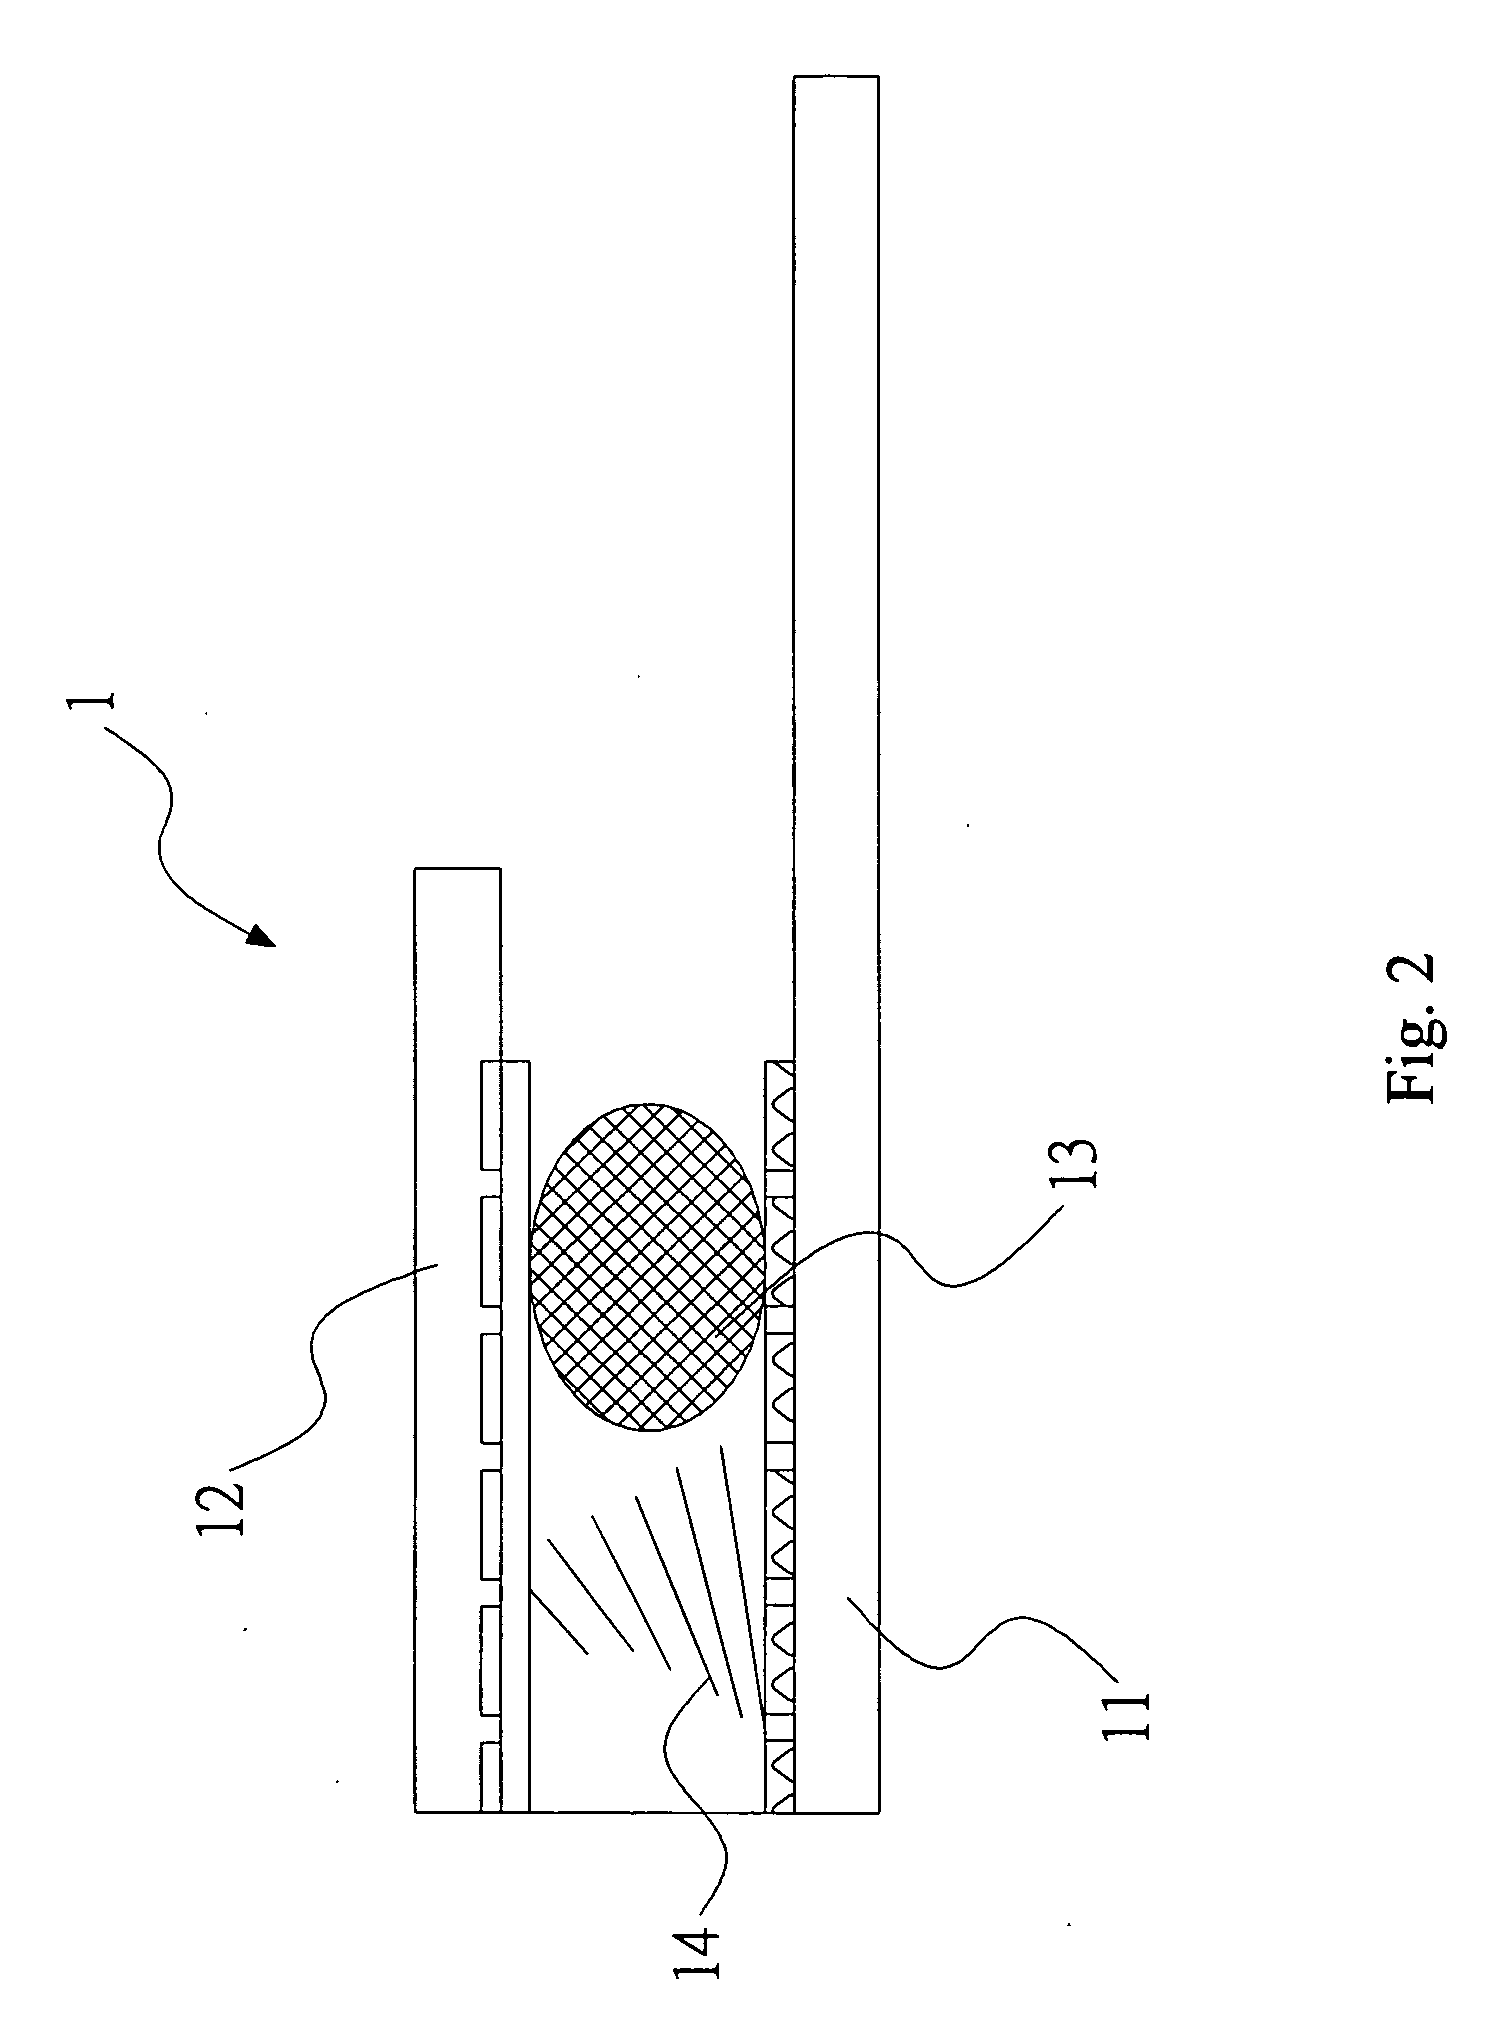 Large-scale display device